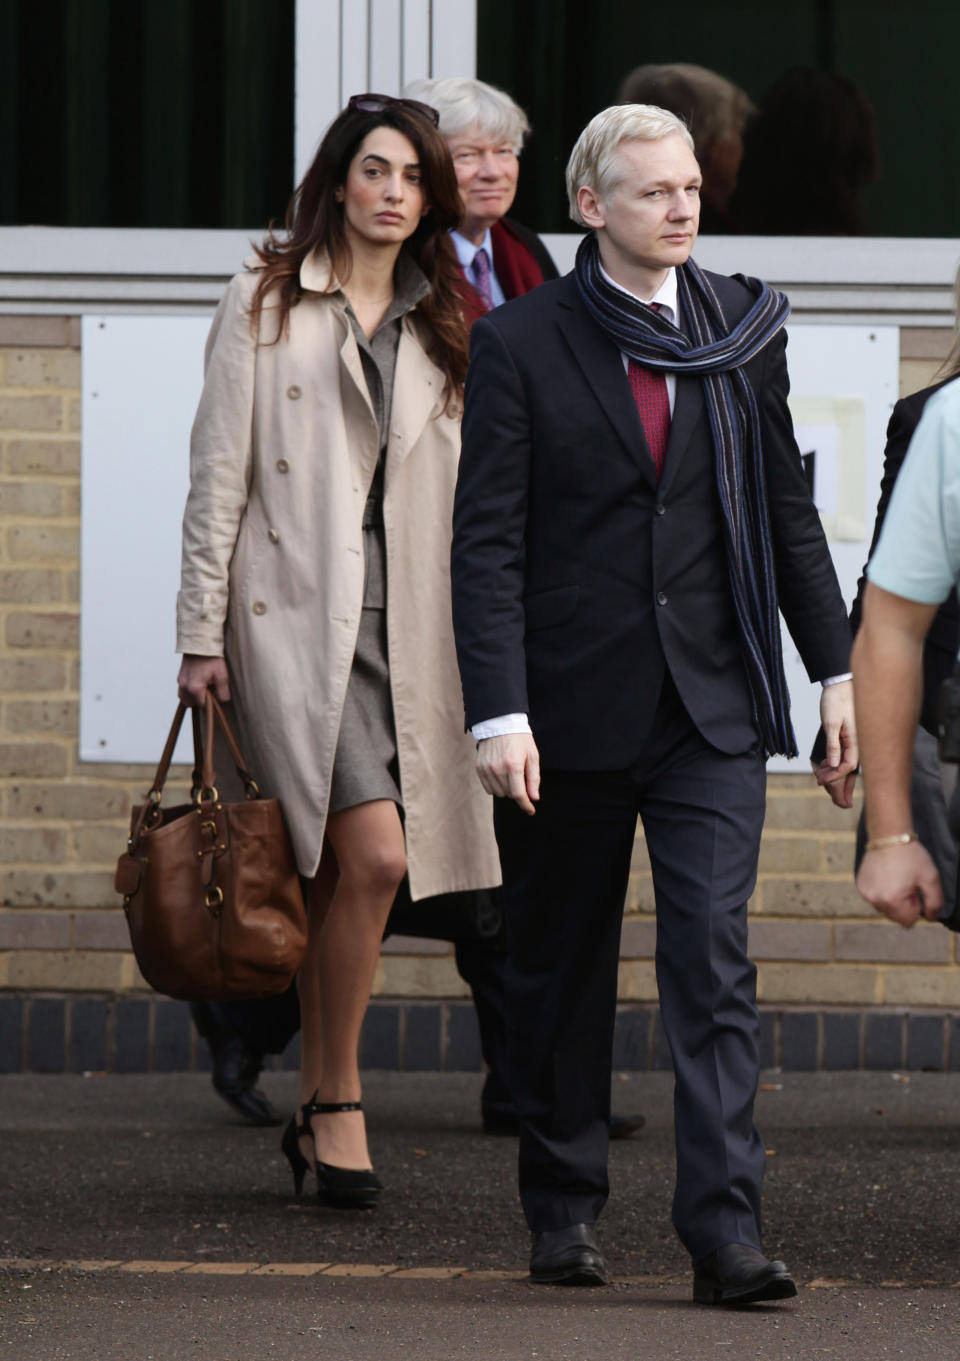 FILE - In this Thursday, Nov 24, 2011 file photo, lawyer Amal Alamuddin, left, is seen walking alongside WikiLeaks founder Julian Assange as they leave Belmarsh Magistrates Court in south east London after his extradition hearing to Sweden to be prosecuted over claims of sexual assault. Hollywood's most eligible bachelor may be getting hitched. A London law firm on Monday April 28, 2014, has congratulated one of its lawyers Amal Alamuddin on her engagement to George Clooney. (AP Photo/Yui Mok, PA Wire, file) UNITED KINGDOM OUT - NO SALES - NO ARCHIVES